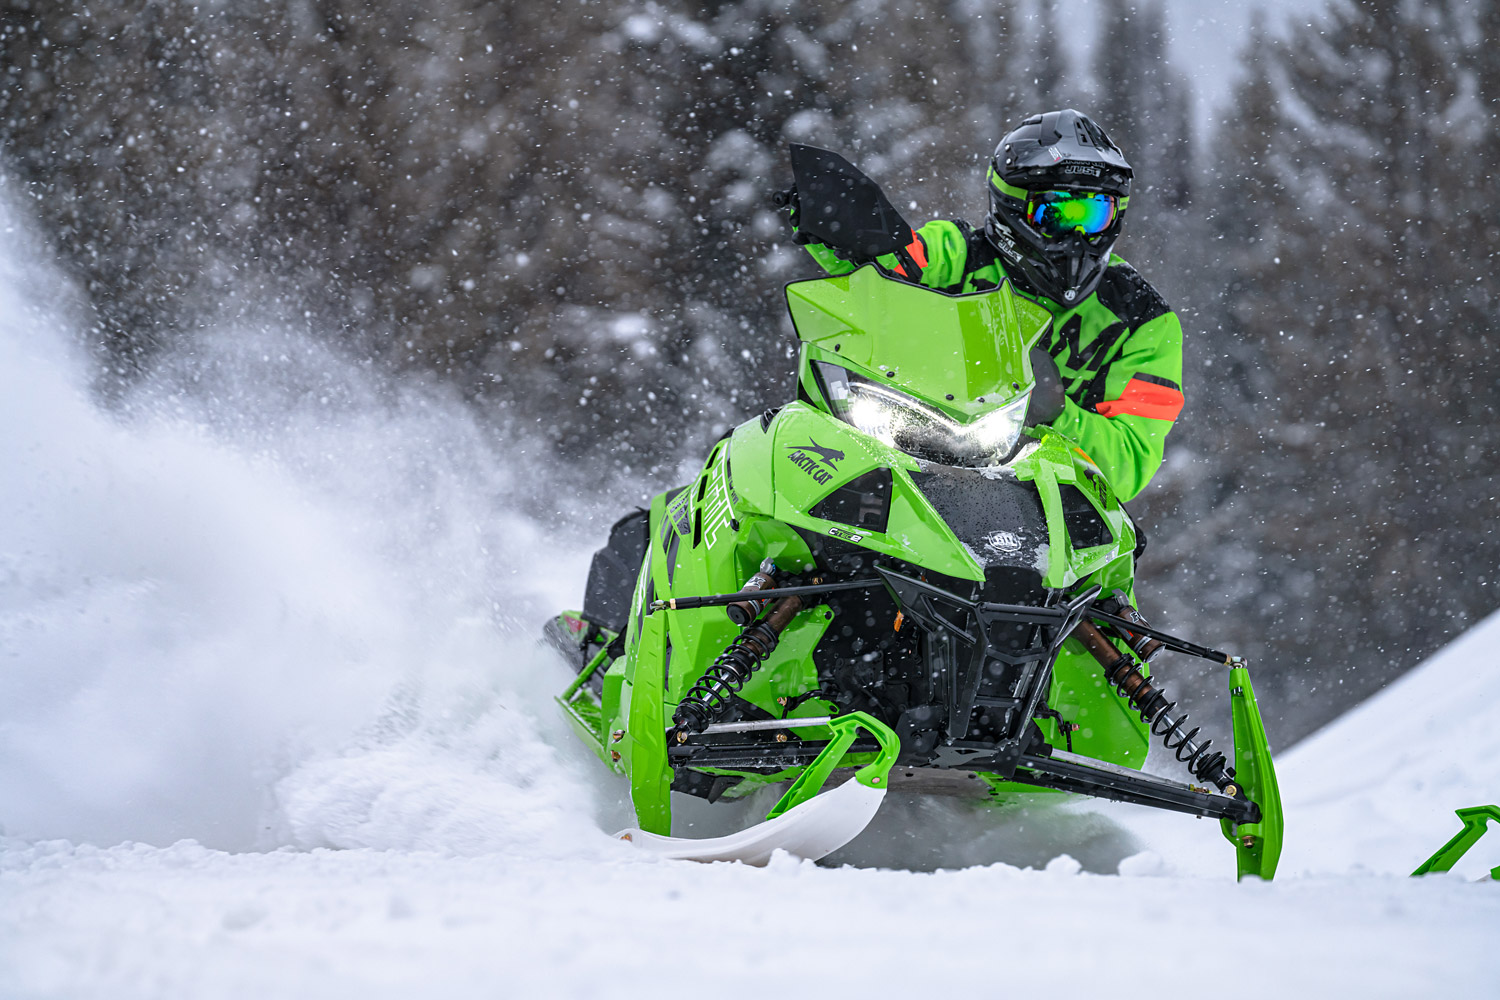 ARCTIC CAT'S NEW CHASSIS: Part II